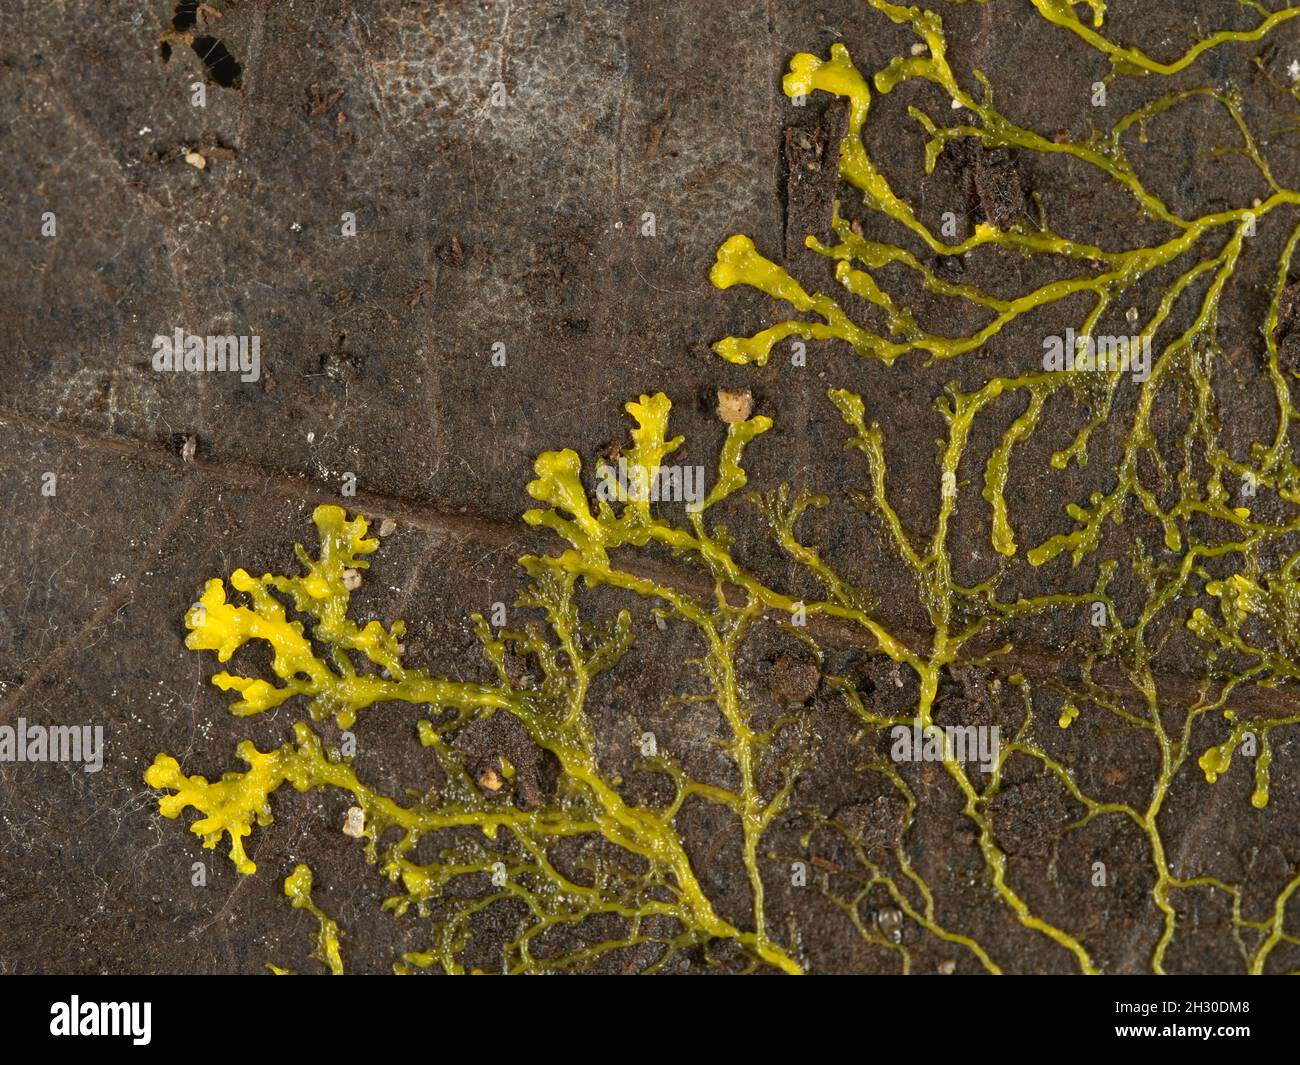 Yellow slime mould or slime mold (Physarum polycephalum) forming a tubular network of protoplasmic strands across a dead leaf  in search of food Stock Photo